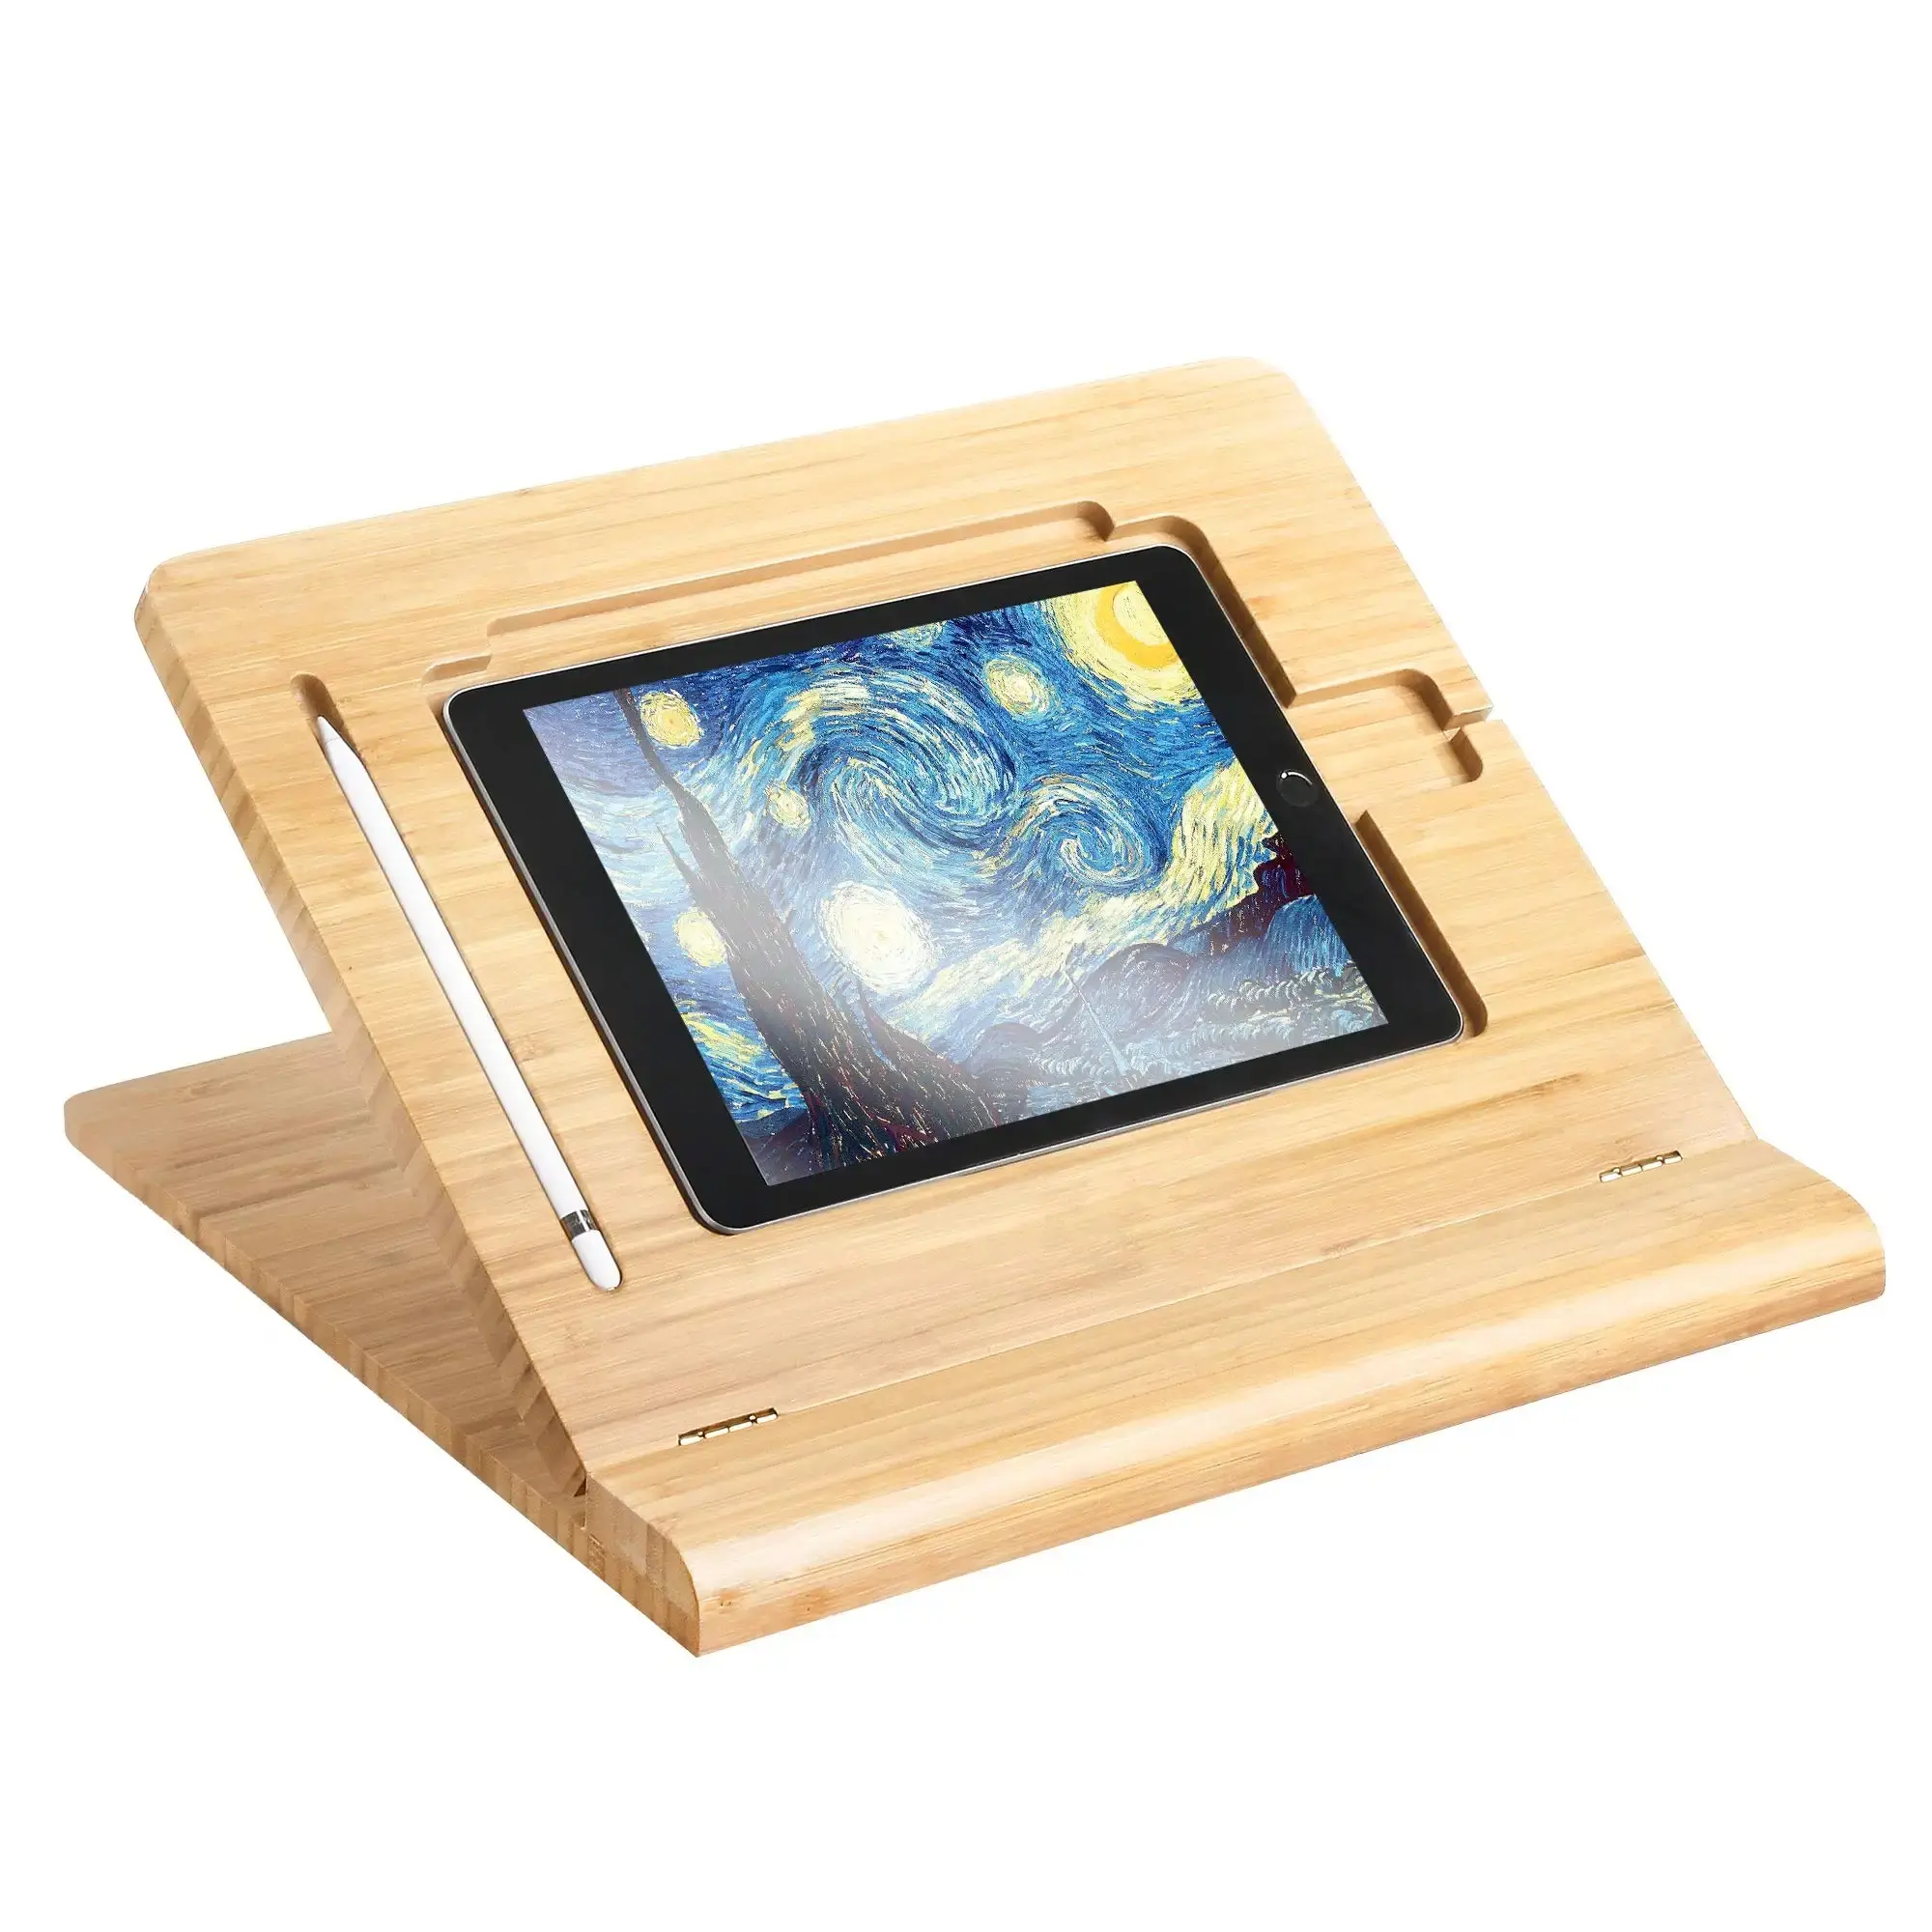 Tablet Stand Holder Bamboo Adjustable Foldable Multi-Angle Wooden Organizer for iPad Stable for Drawing Watching